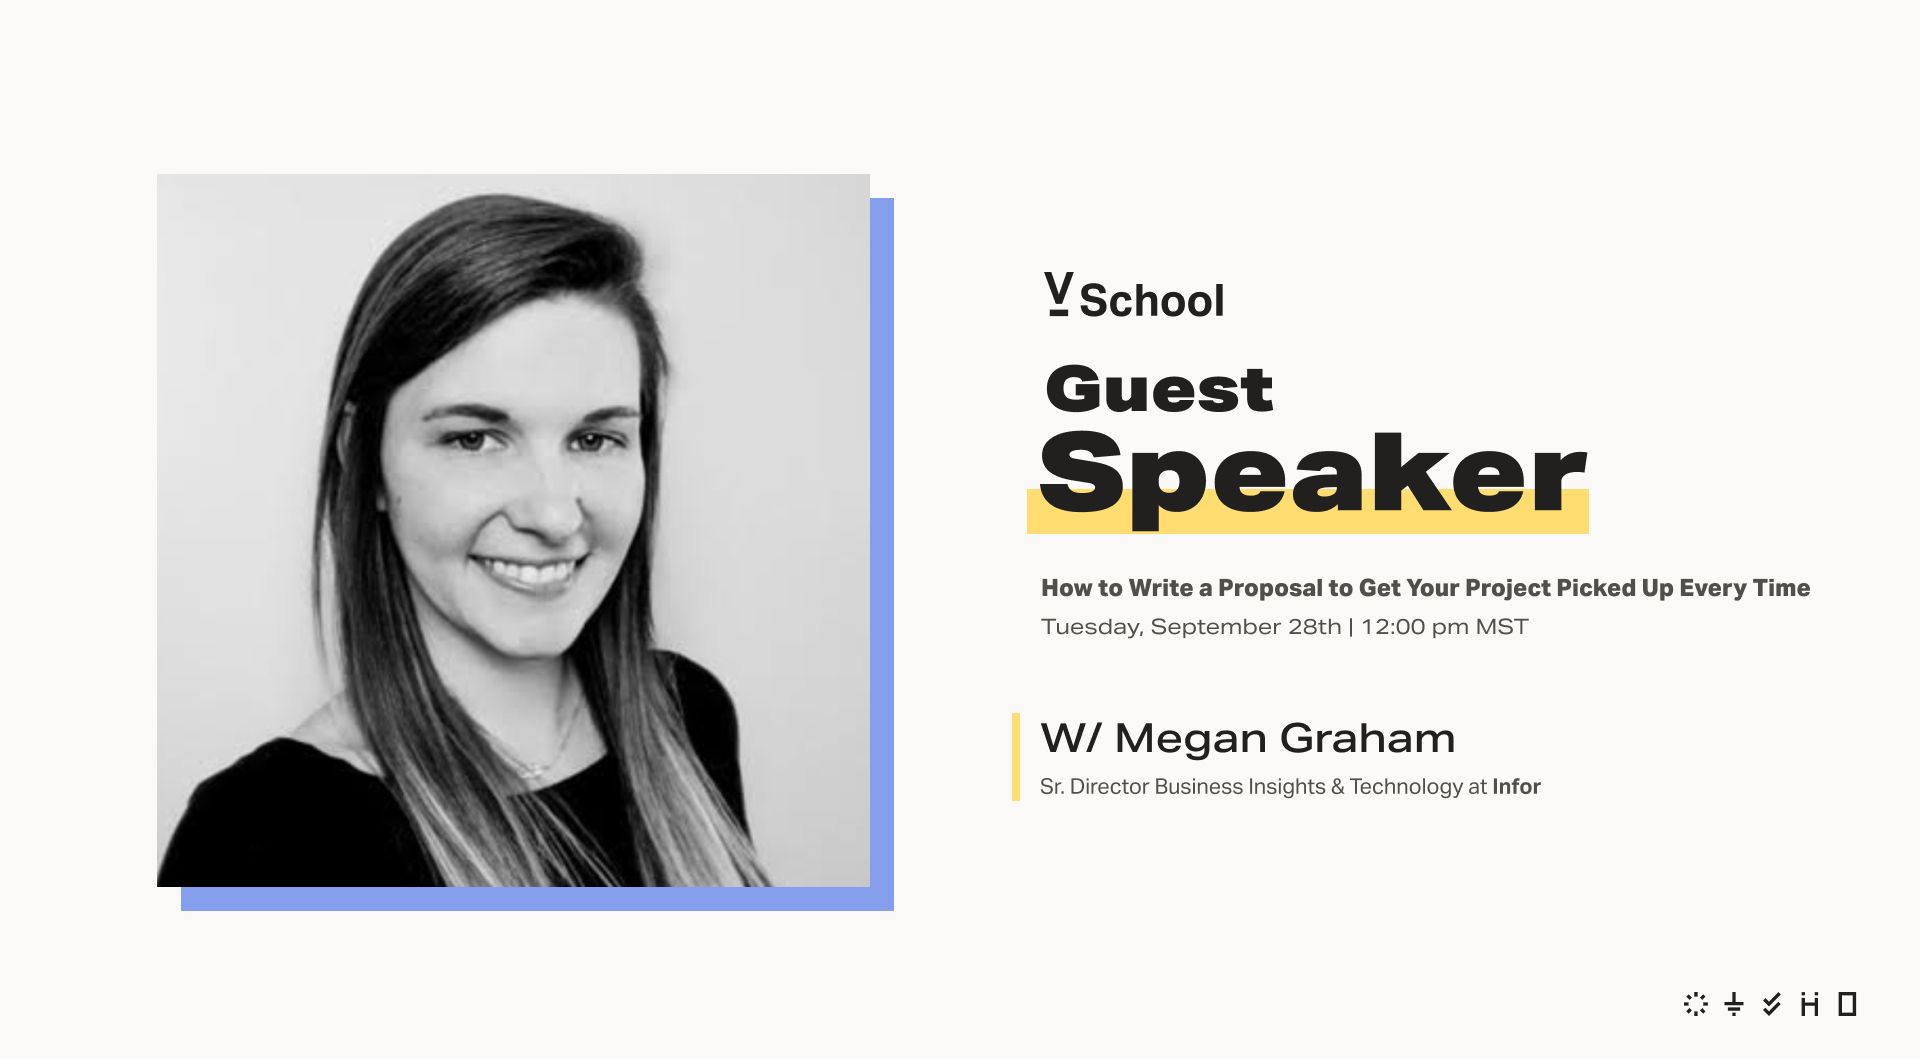 How to Write a Proposal to Get Your Project Picked Up Every Time w/ Megan Graham